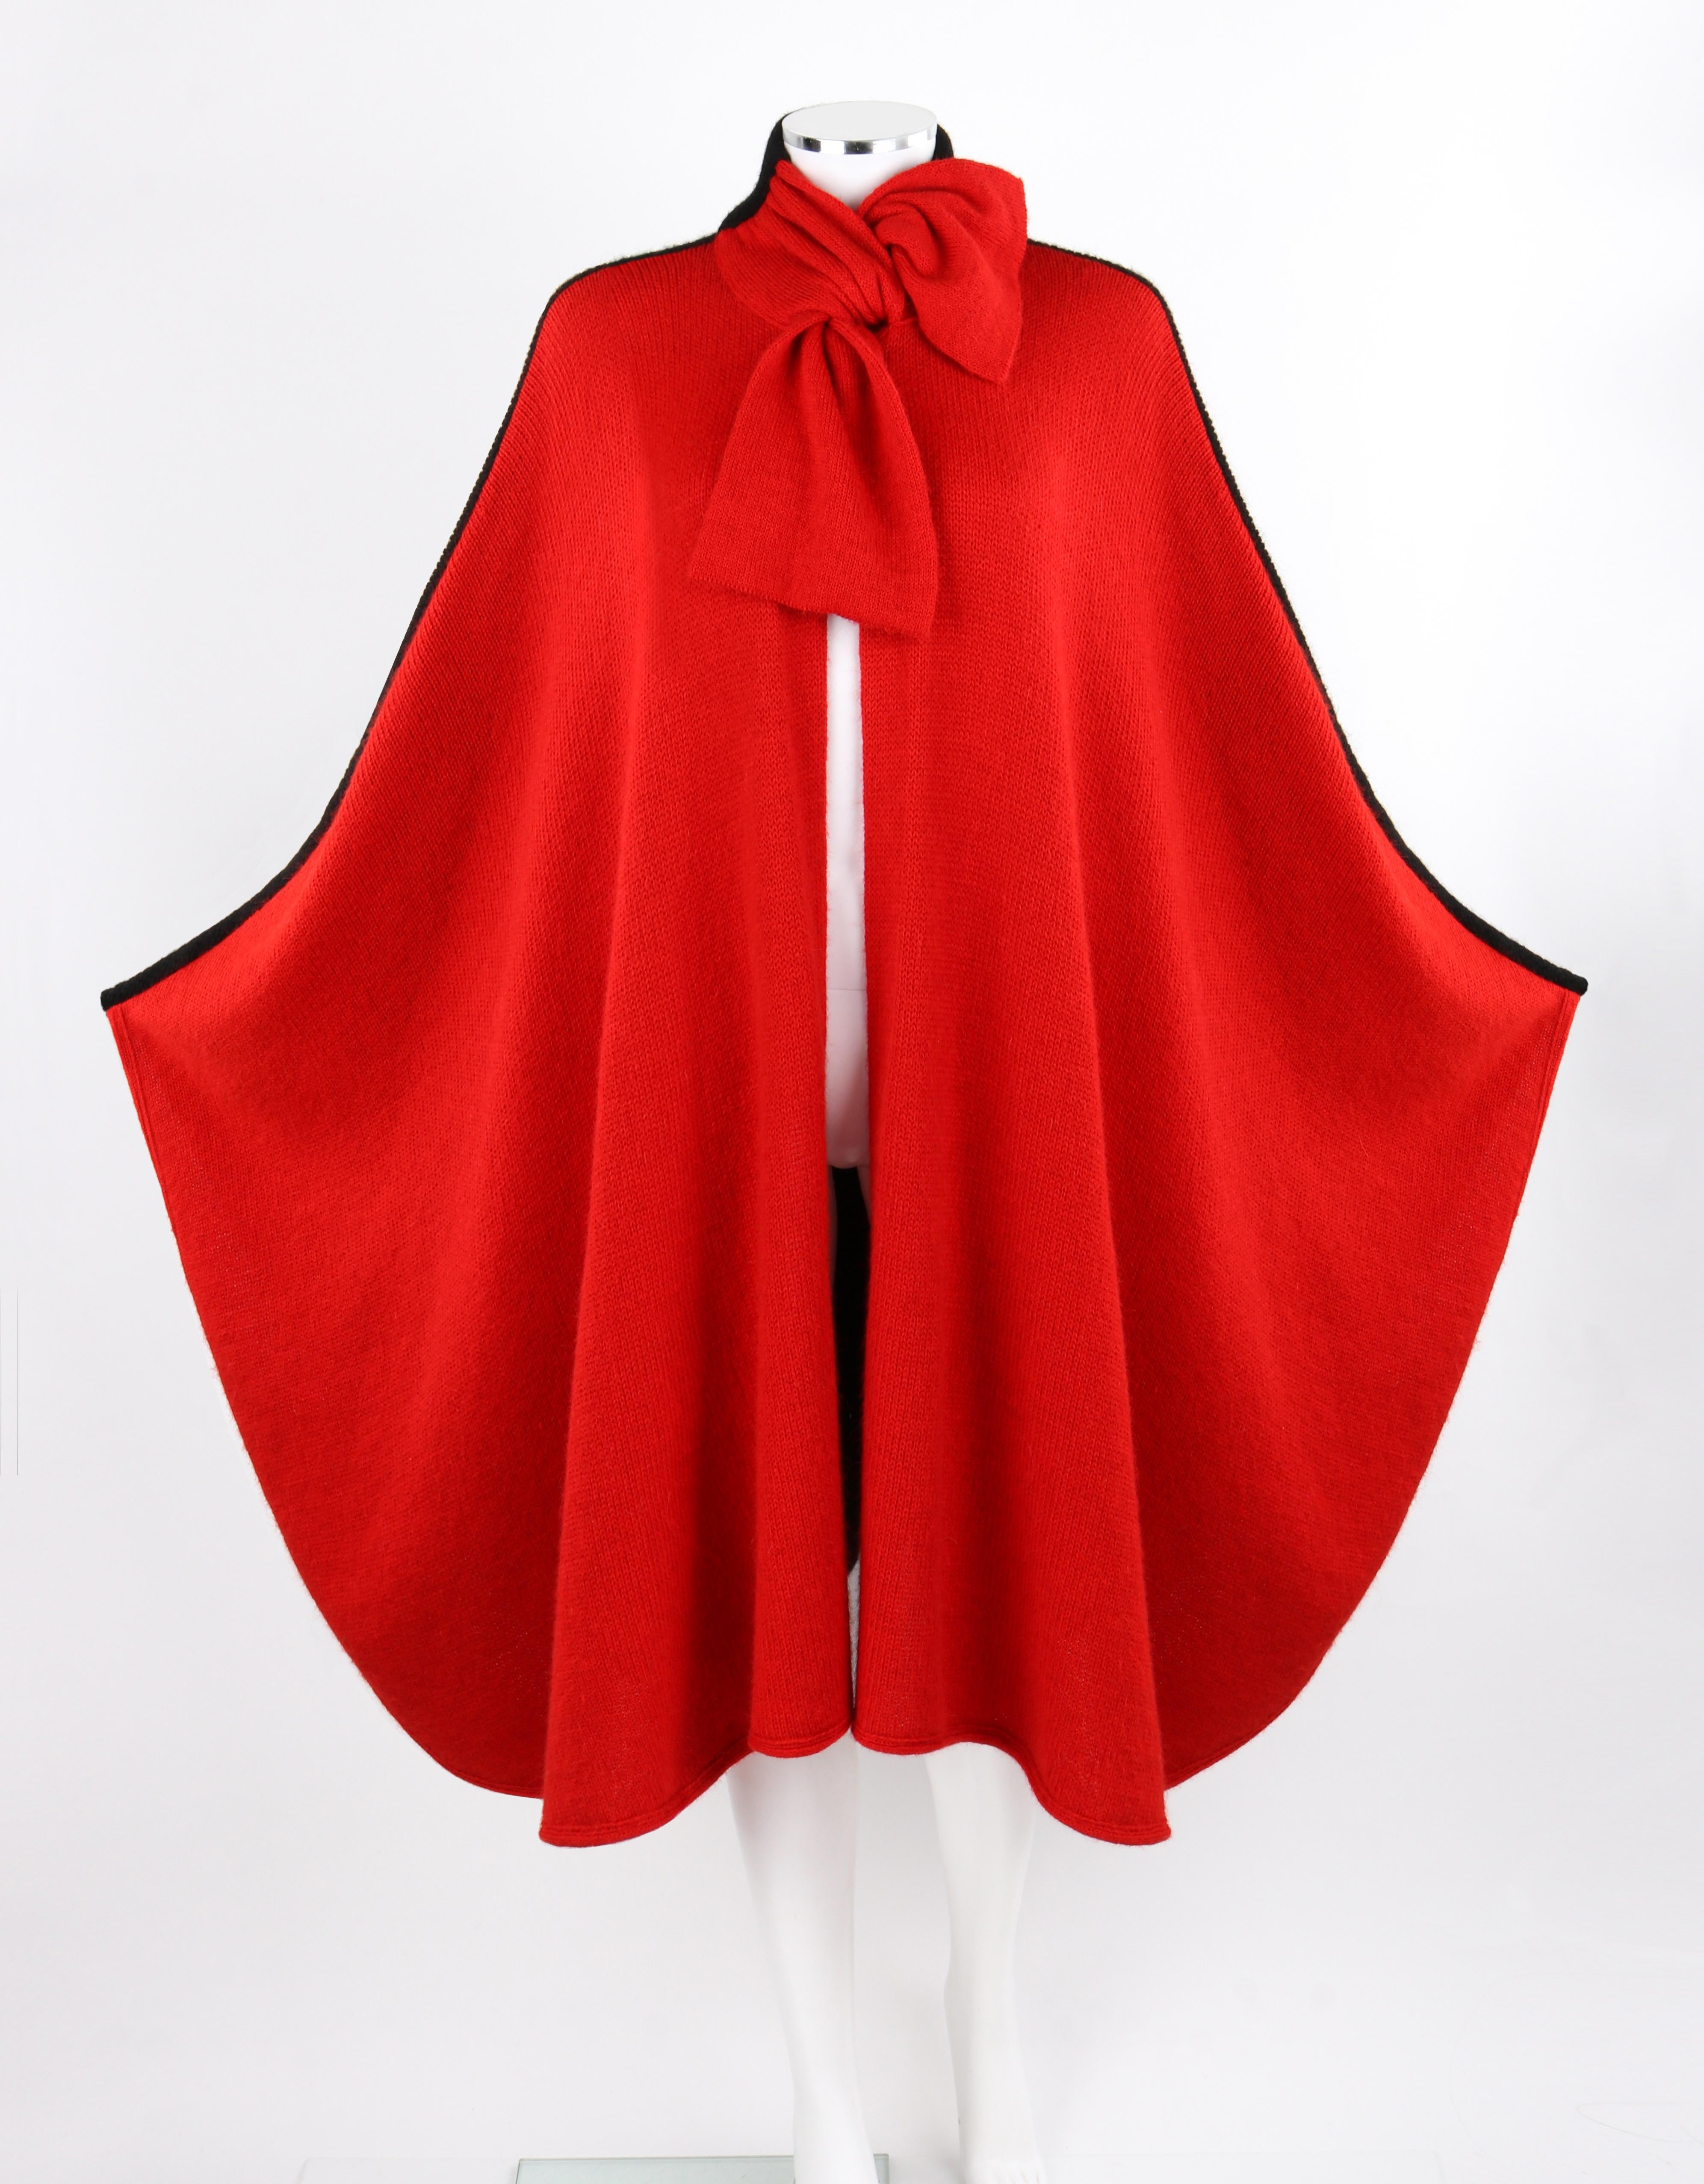 VALENTINO Knitwear c.1980's Red Black Alpaca Wool Knit Scarf Tie Button Cape VTG

Brand / Manufacturer: Valentino Knitwear
Circa: 1980's
Designer: Valentino Garavani
Style: Cape
Color(s): Red, Black
Lined: No
Marked Fabric: 